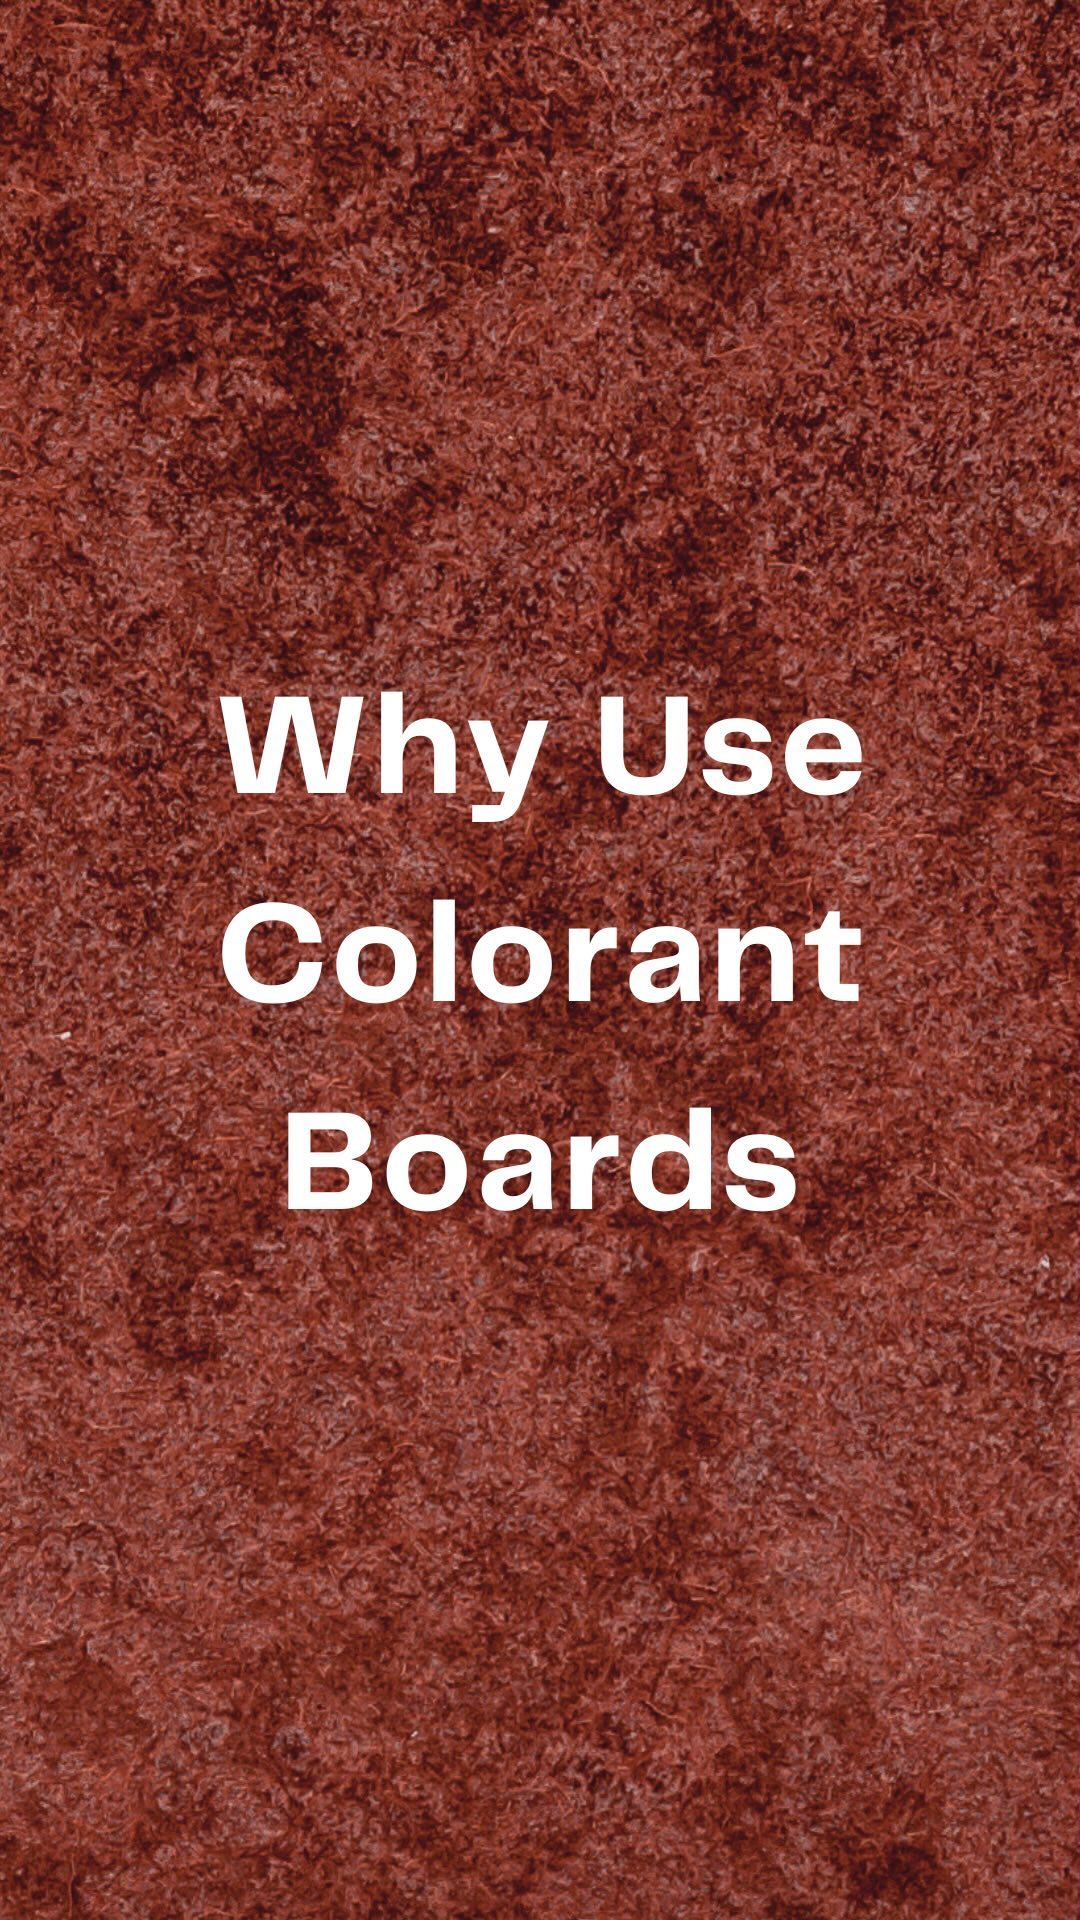 A few reason of why exactly you should use the Colorant Boards for your interiors/exteriors! 
-Handcrafted in India
-Make in India
-
#uvboards #flexistone #stoneboards #interiordesign #exteriordesign #stonepanels #architecturedesign #architect #interiordesigners #homedecor
#colorantboards #diypanels #cladding #facade #ceilit #Greenapplegroupofcompanies #iiid #stoneworksindia #stonework #concretesheets #concreteindia #concretedesign #concreteconstruction